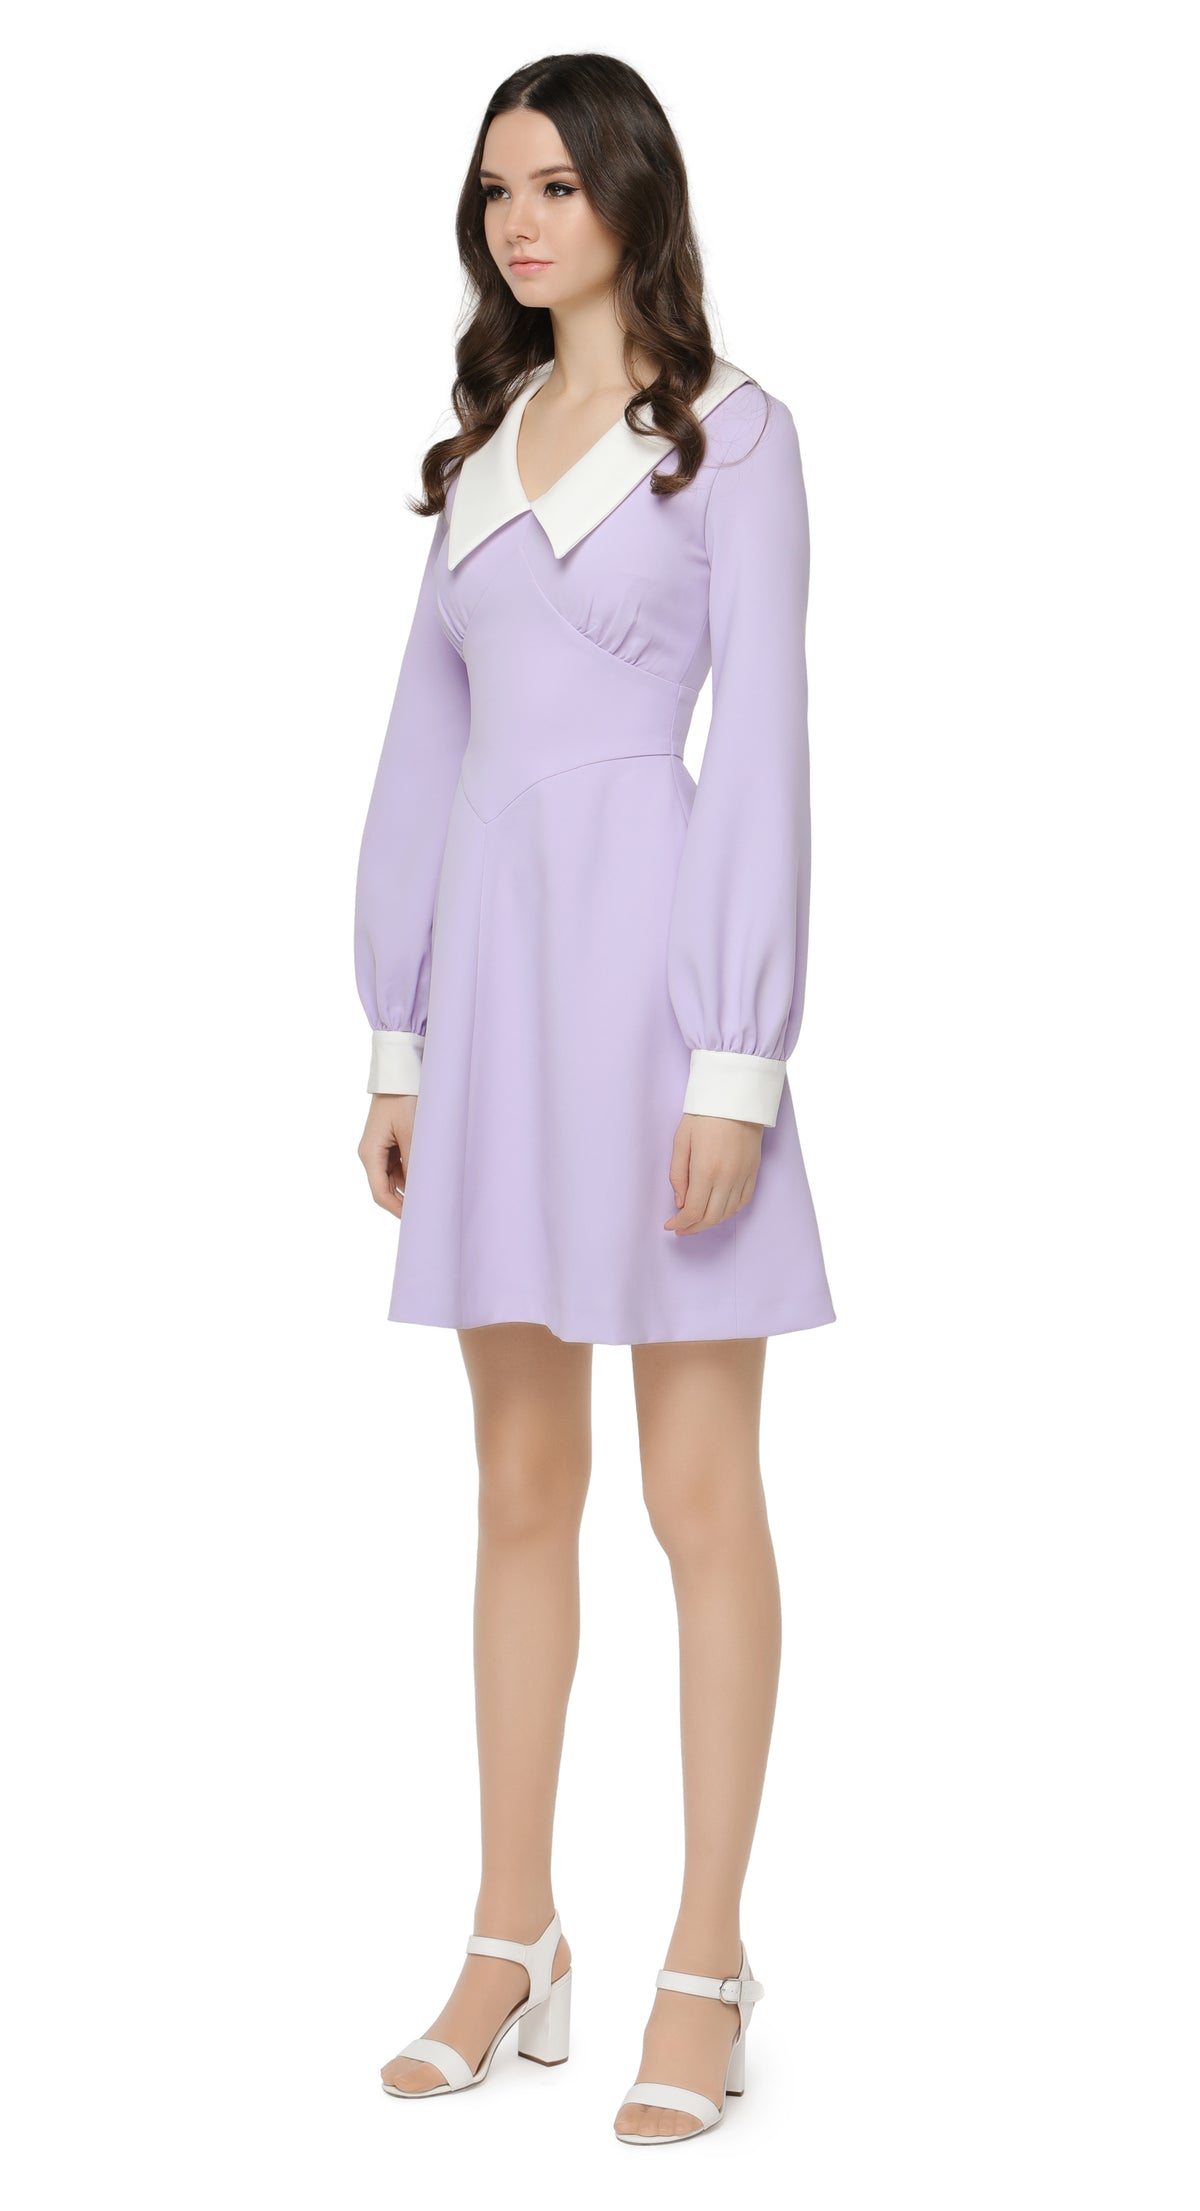 1970s style flared lavender party dress with large dramatic white collar and slightly puff sleeve at the cuff. A light big night out look dressed up with heels or down with kicks. Fully lined with invisible back zipper.  Choose bespoke for custom sizing, shorter sleeve, colour and hem length options.